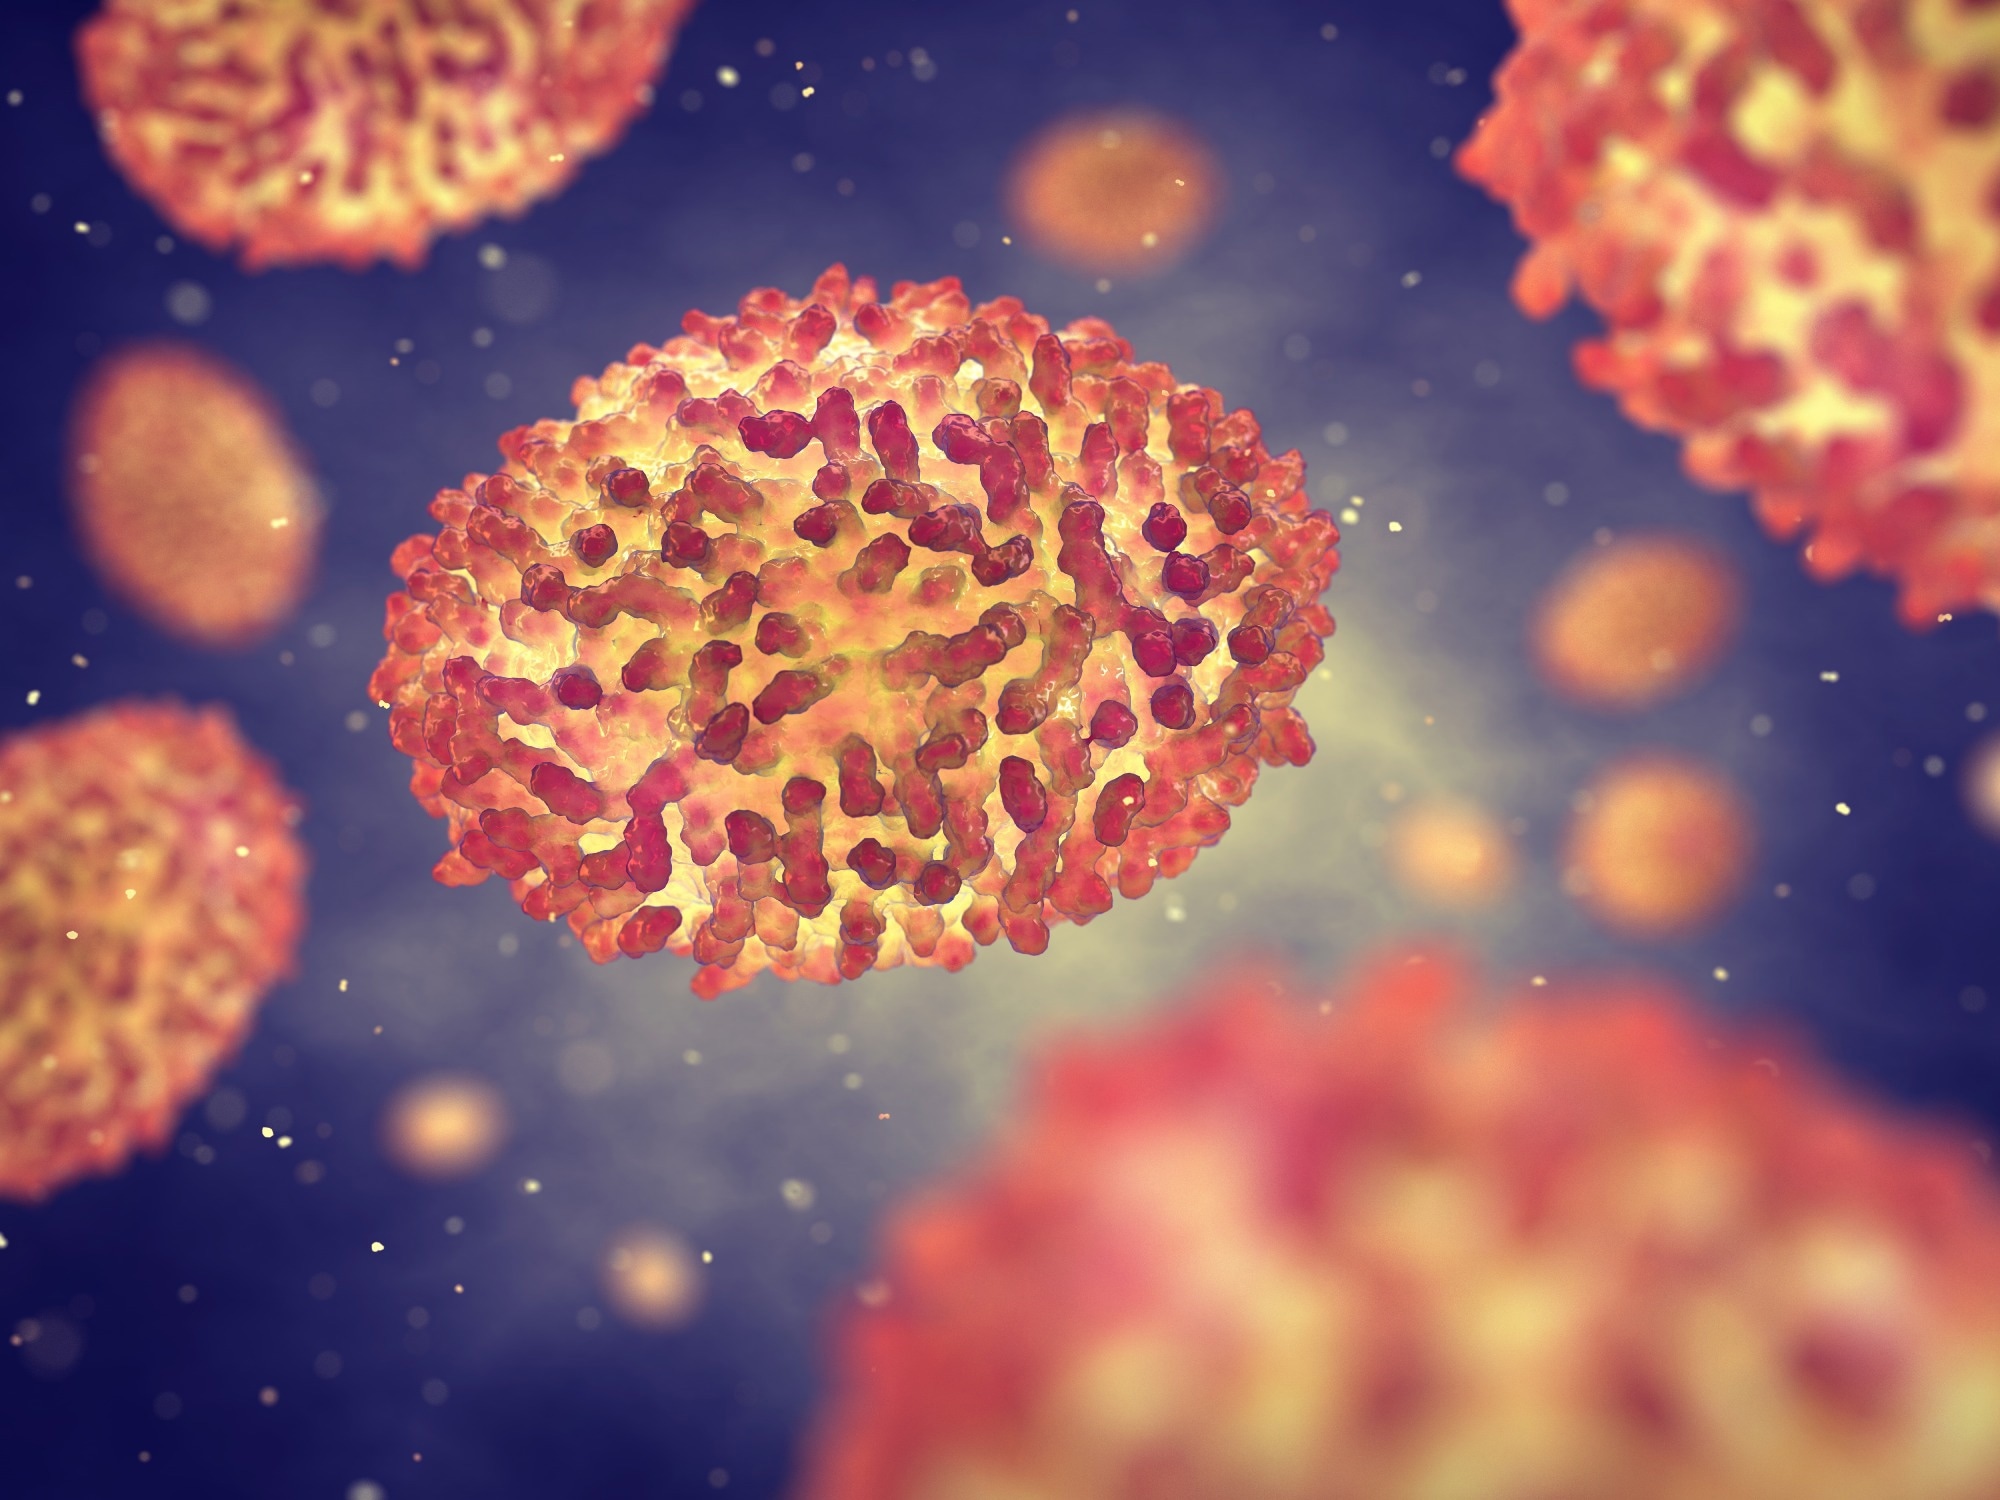 Study: Single and 2-dose vaccinations with modified vaccinia Ankara-Bavarian Nordic® induce durable B cell memory responses comparable to replicating smallpox vaccines. Image Credit: nobeastsofierce/Shutterstock